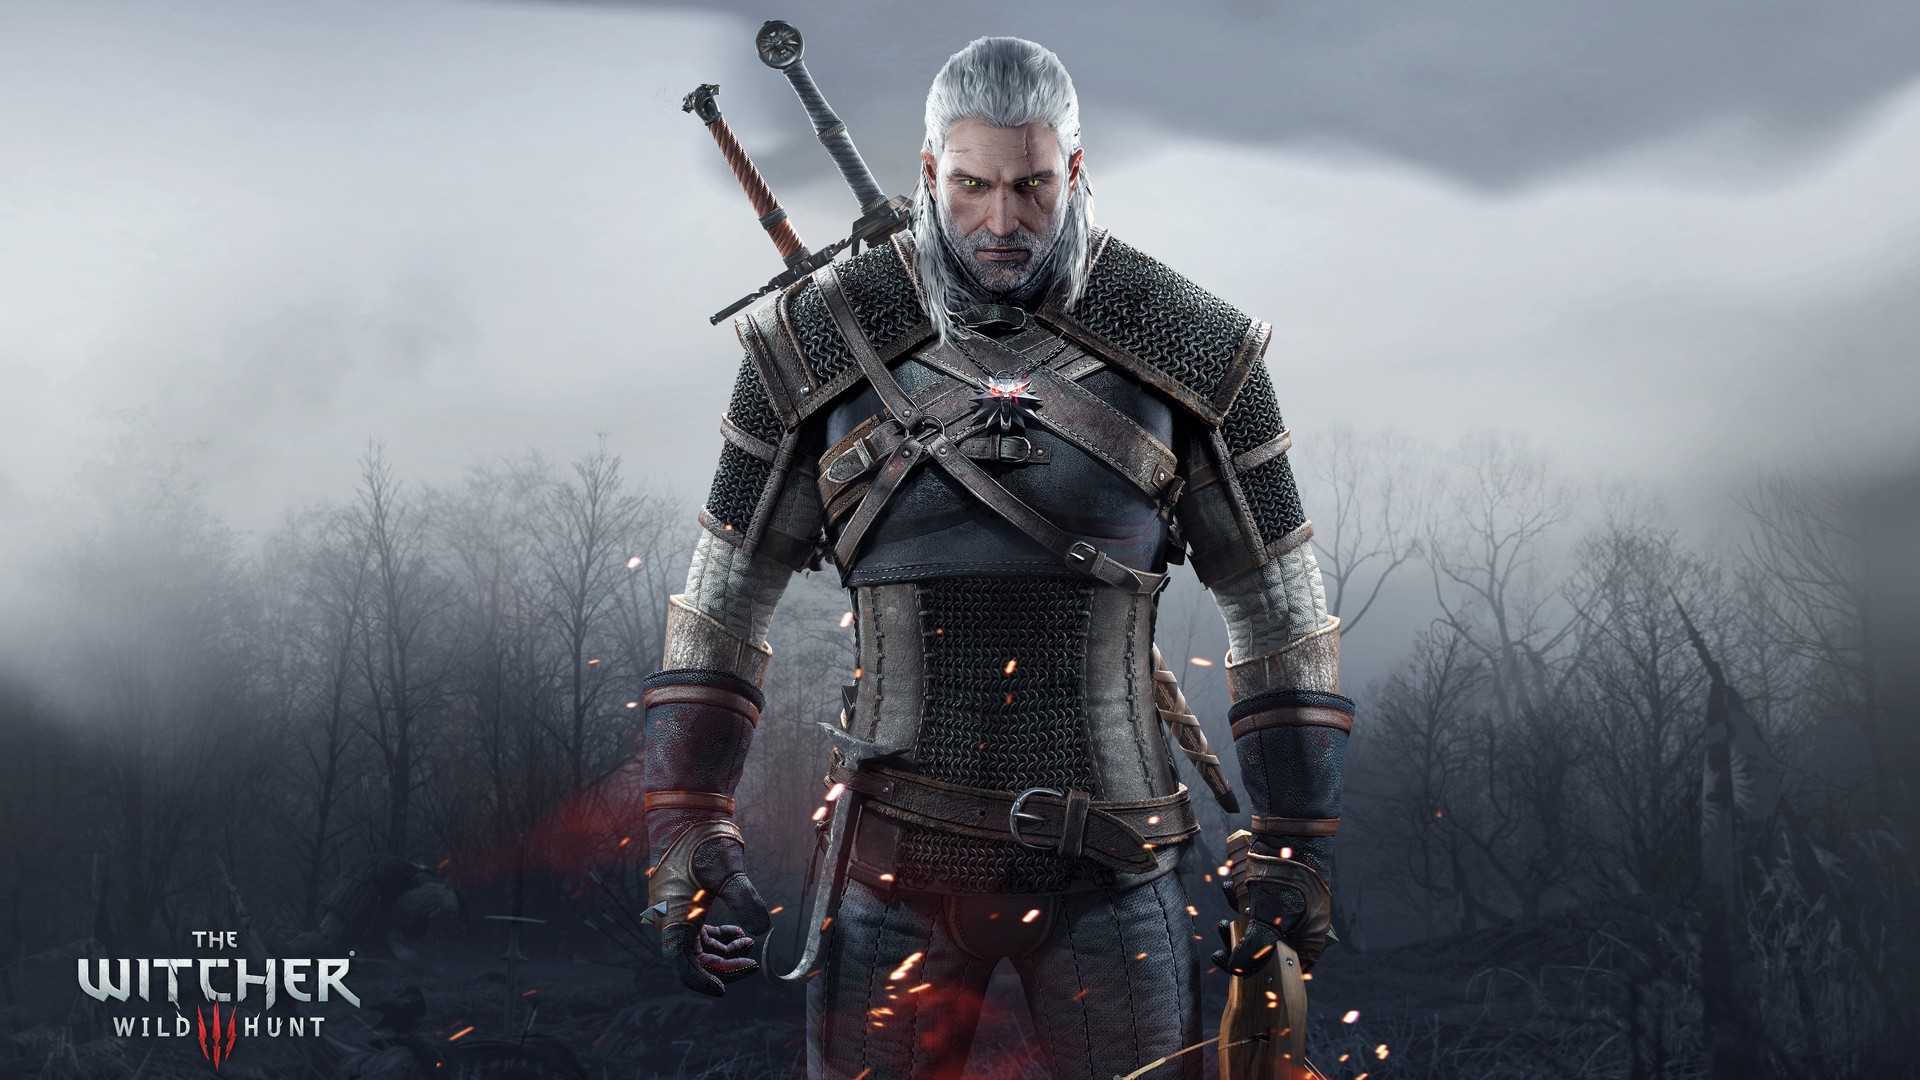 The Witcher Wild Hunt Wallpaper HD with high-resolution 1920x1080 pixel. You can use this poster wallpaper for your Desktop Computers, Mac Screensavers, Windows Backgrounds, iPhone Wallpapers, Tablet or Android Lock screen and another Mobile device